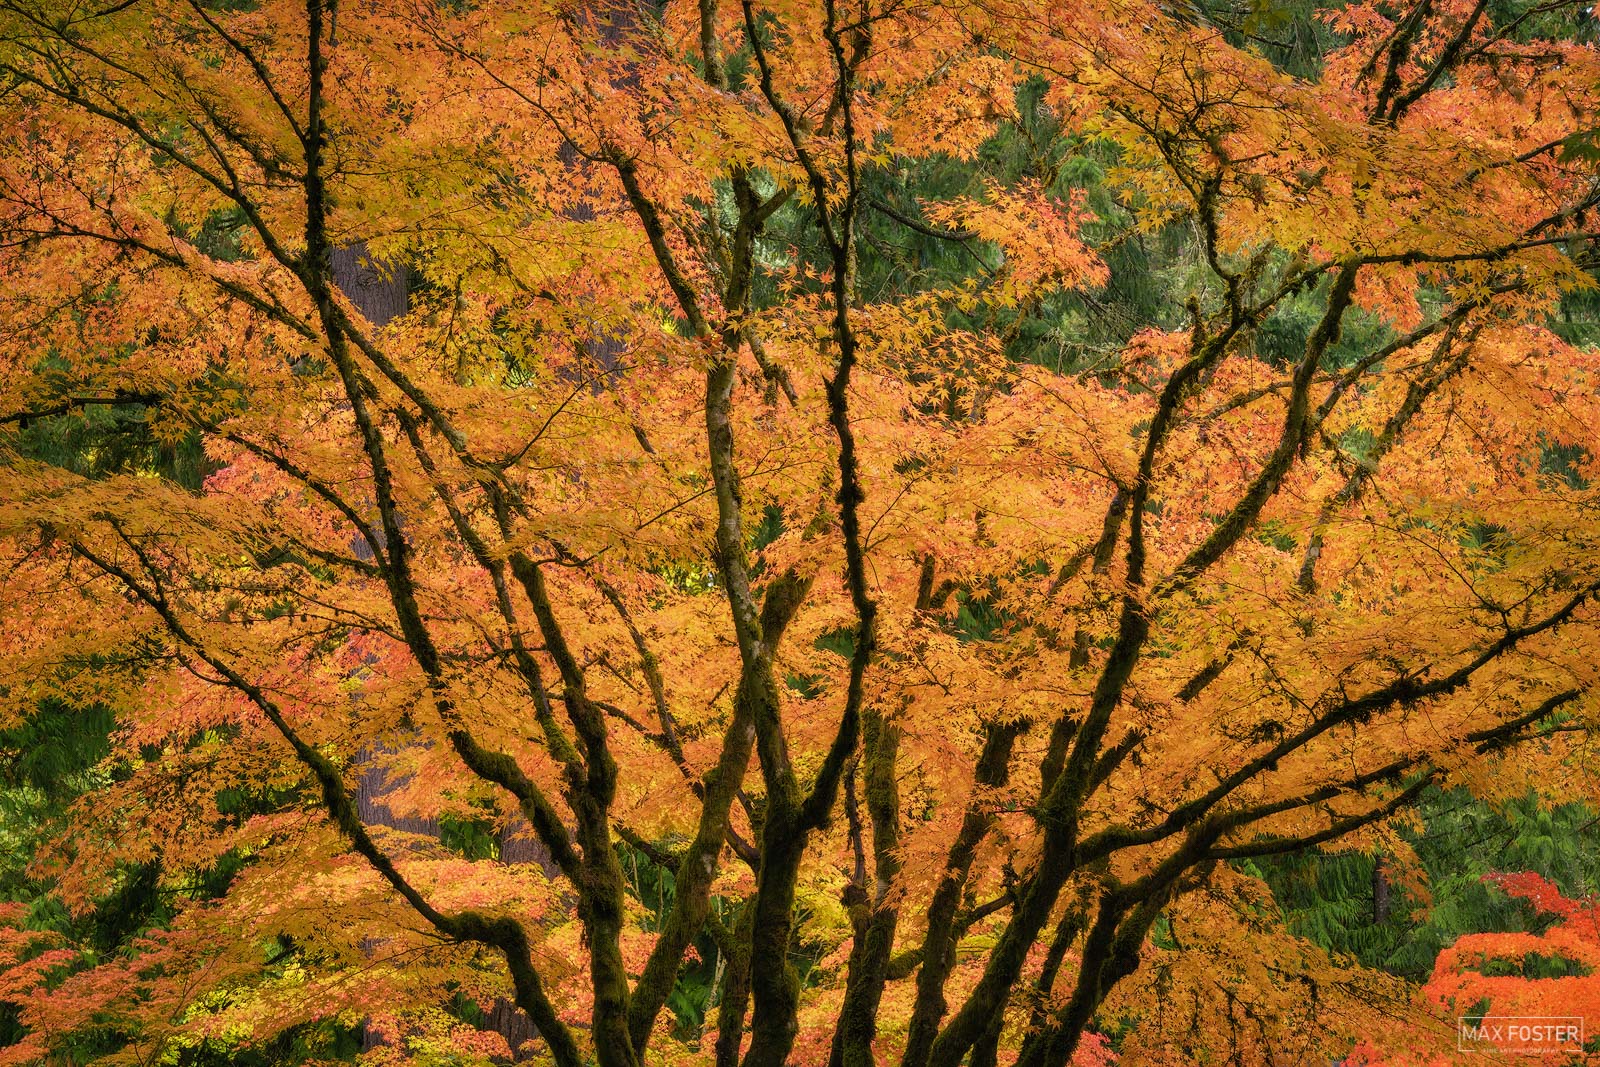 Bring nature into your home with Dreamcatcher, Max Foster's limited edition photography print of a Japanese Maple Tree in the...